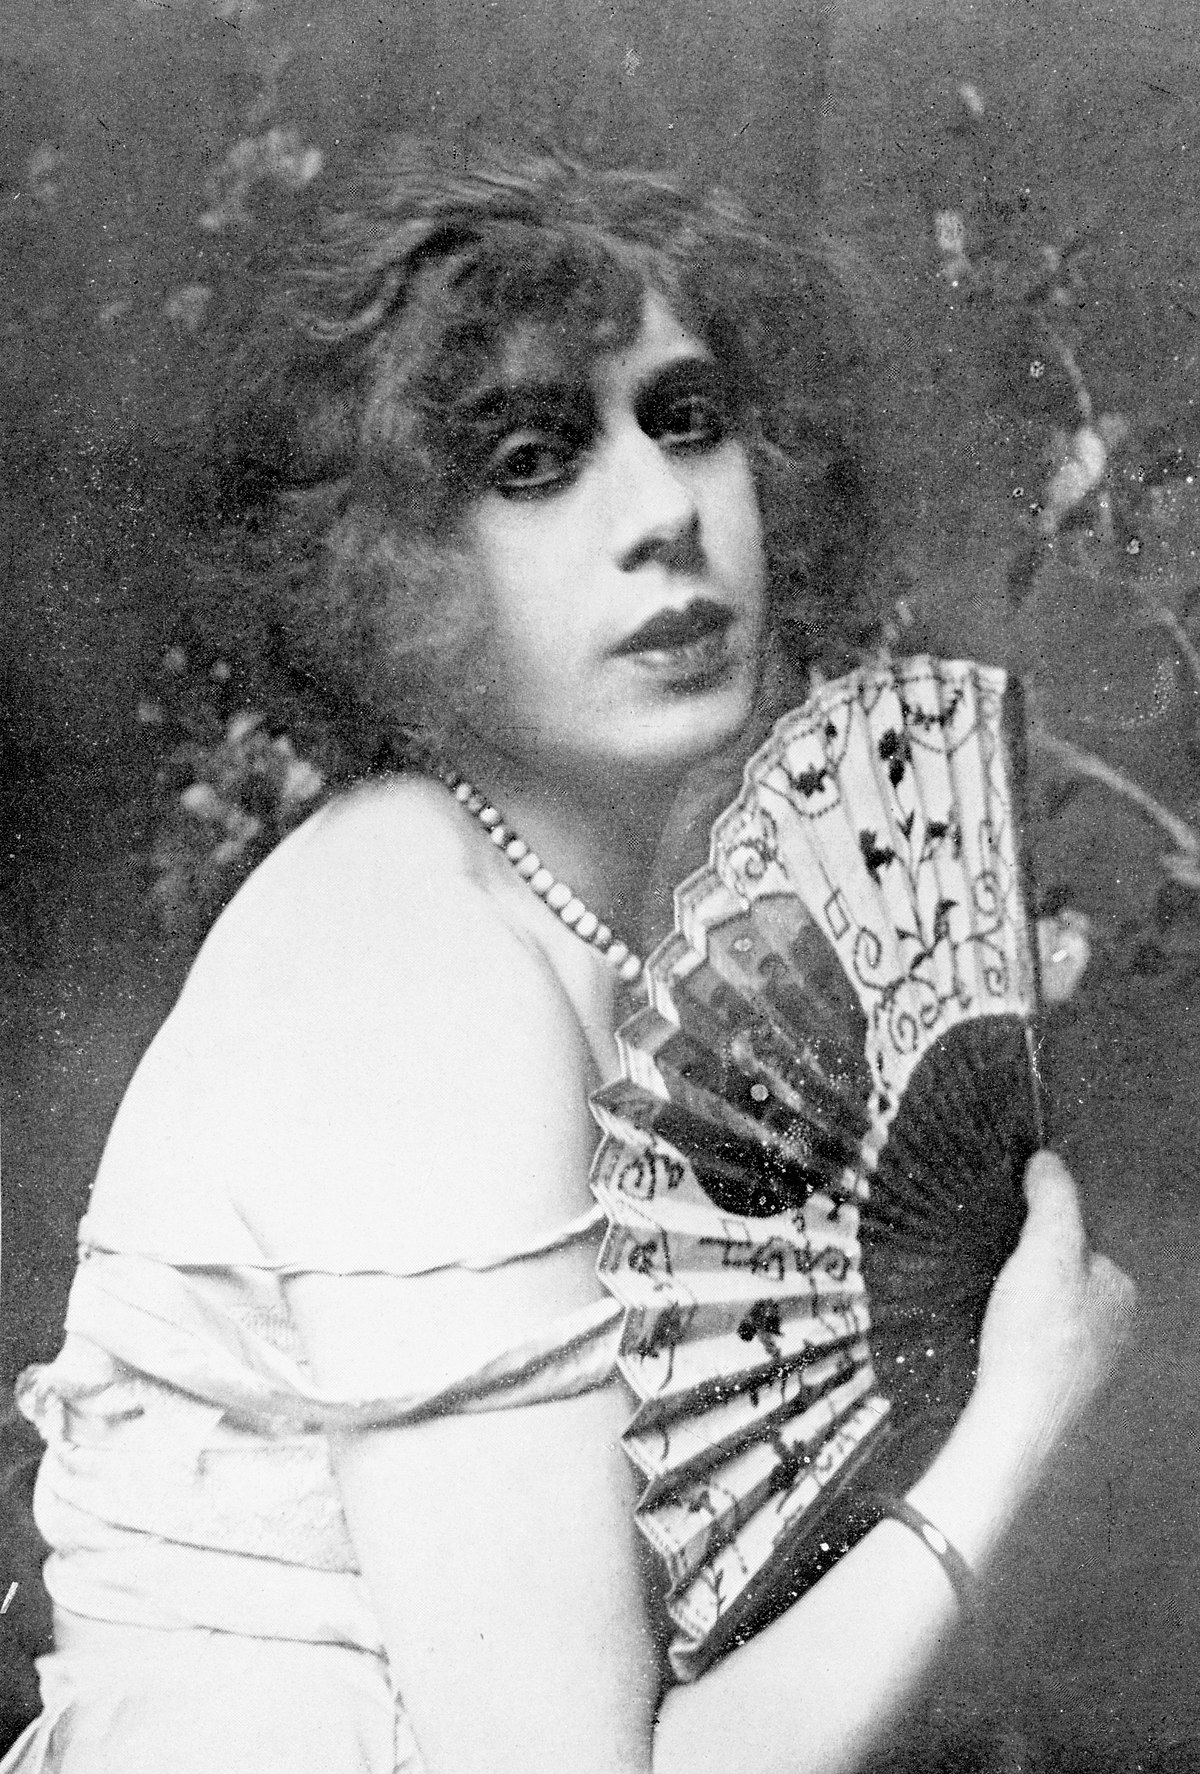 Lili Ilse Elvenes (28 December 1882 – 13 September 1931), better known as Lili Elbe, was a Danish painter, trans woman and among the early recipient